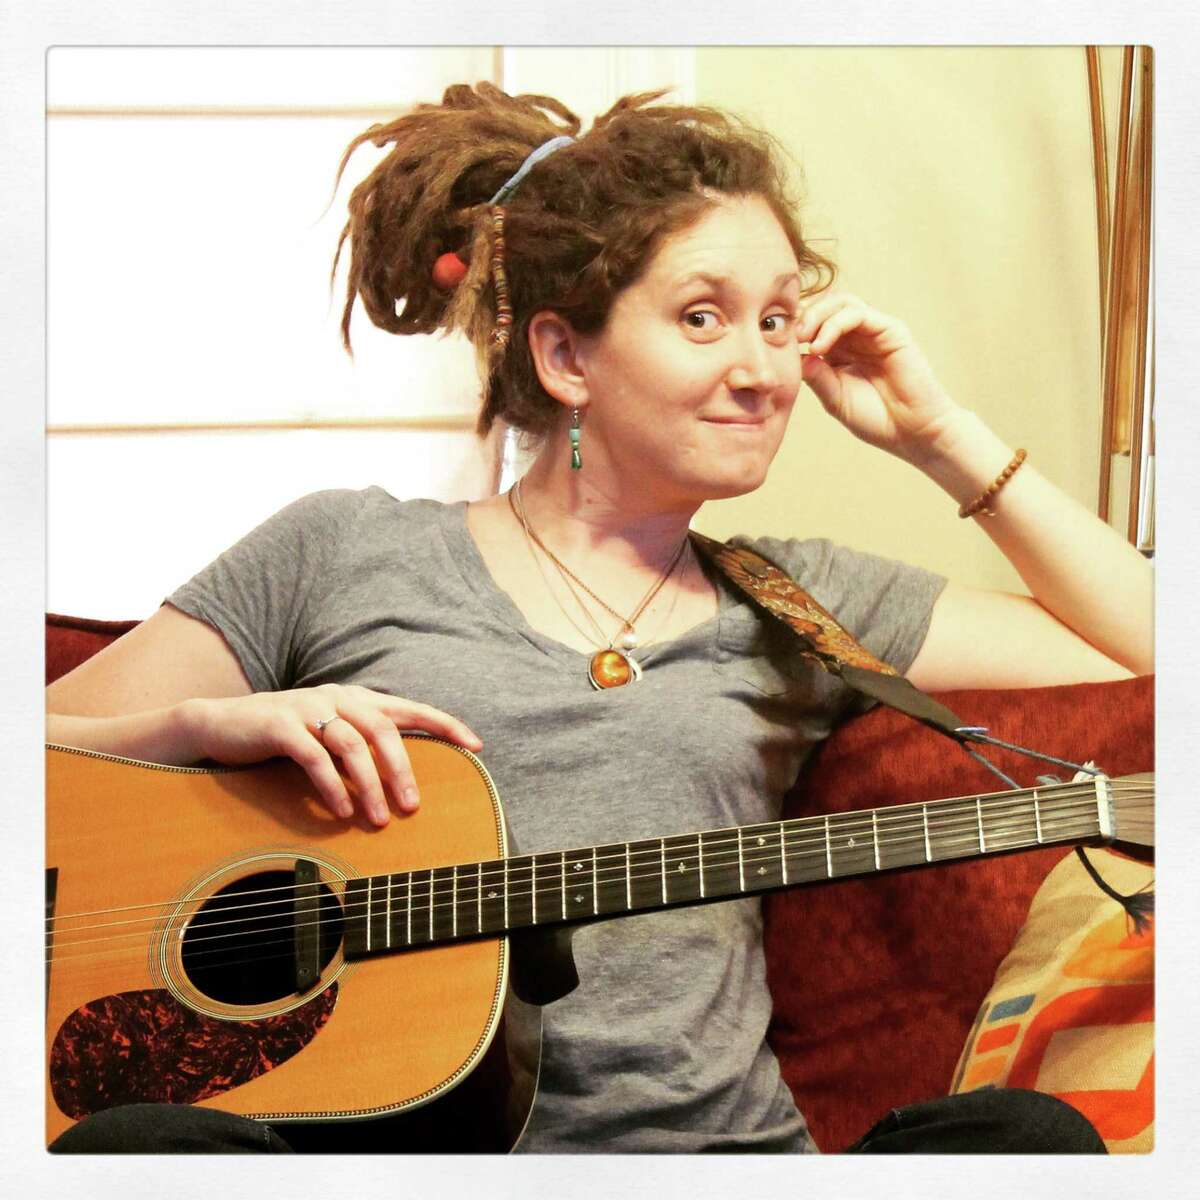 Singer-songwriters Kristen Graves, pictured, and Glenn Roth will perform in CT Folk's CT Artist Showcase.